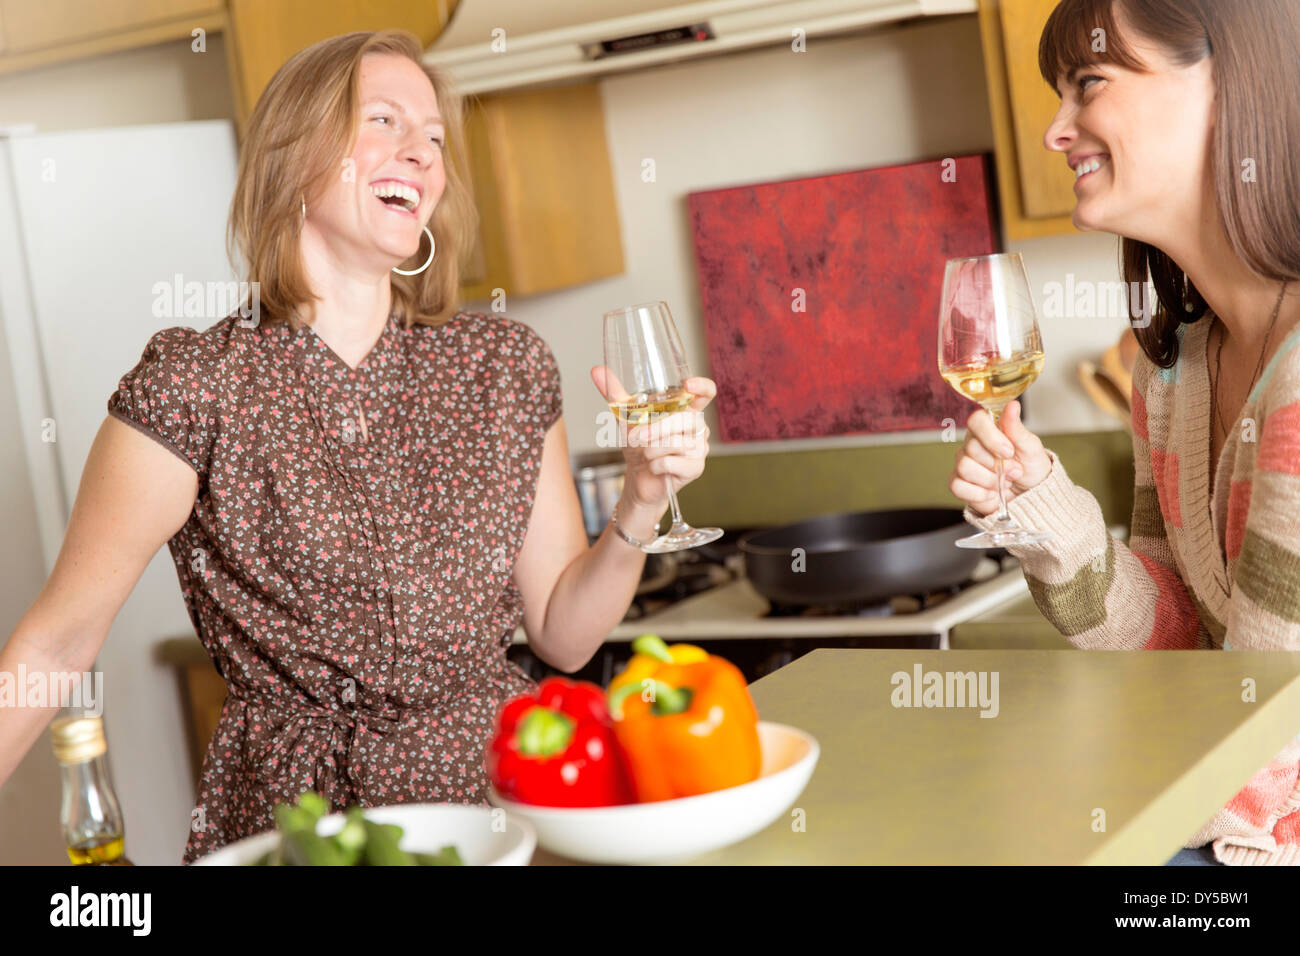 https://c8.alamy.com/comp/DY5BW1/mid-adult-female-friends-drinking-wine-and-laughing-in-kitchen-DY5BW1.jpg